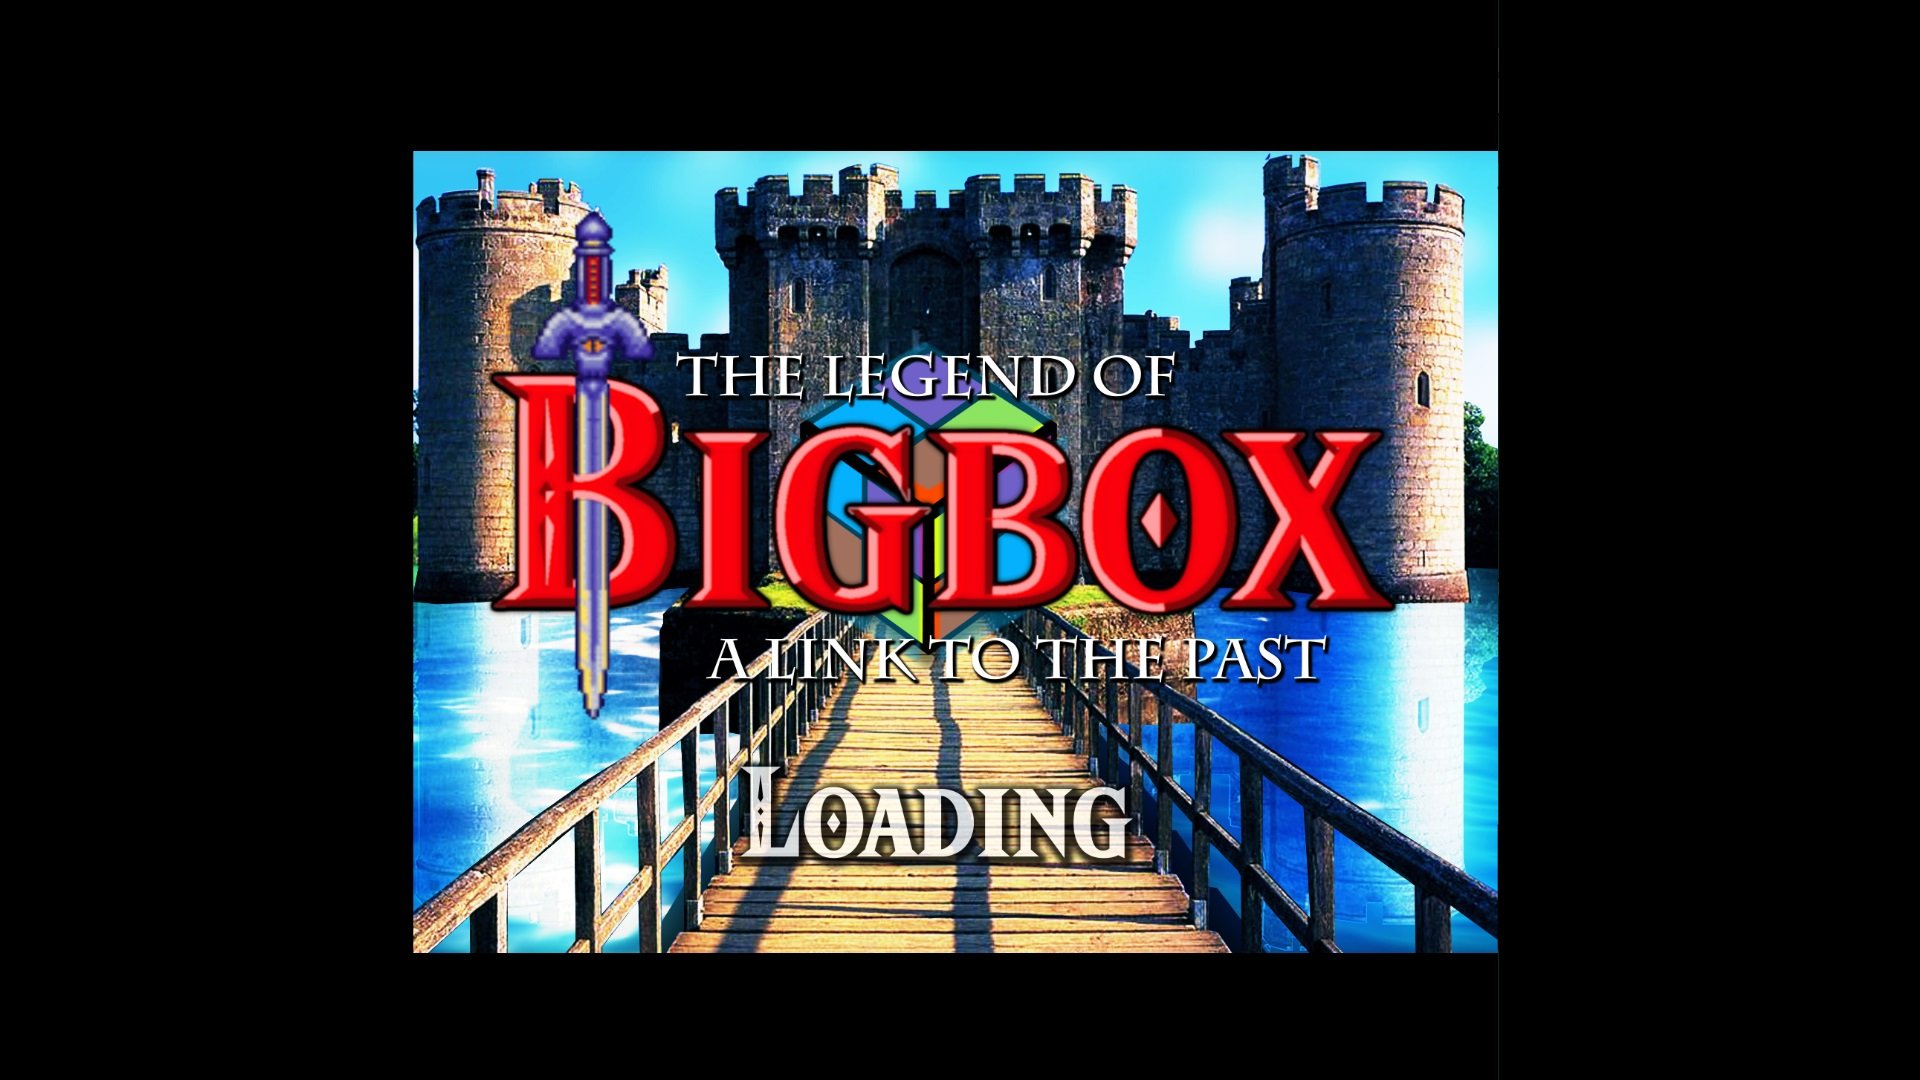 More information about "The Legend of Zelda: A Link to the Past Inspired Startup Video For Bigbox"